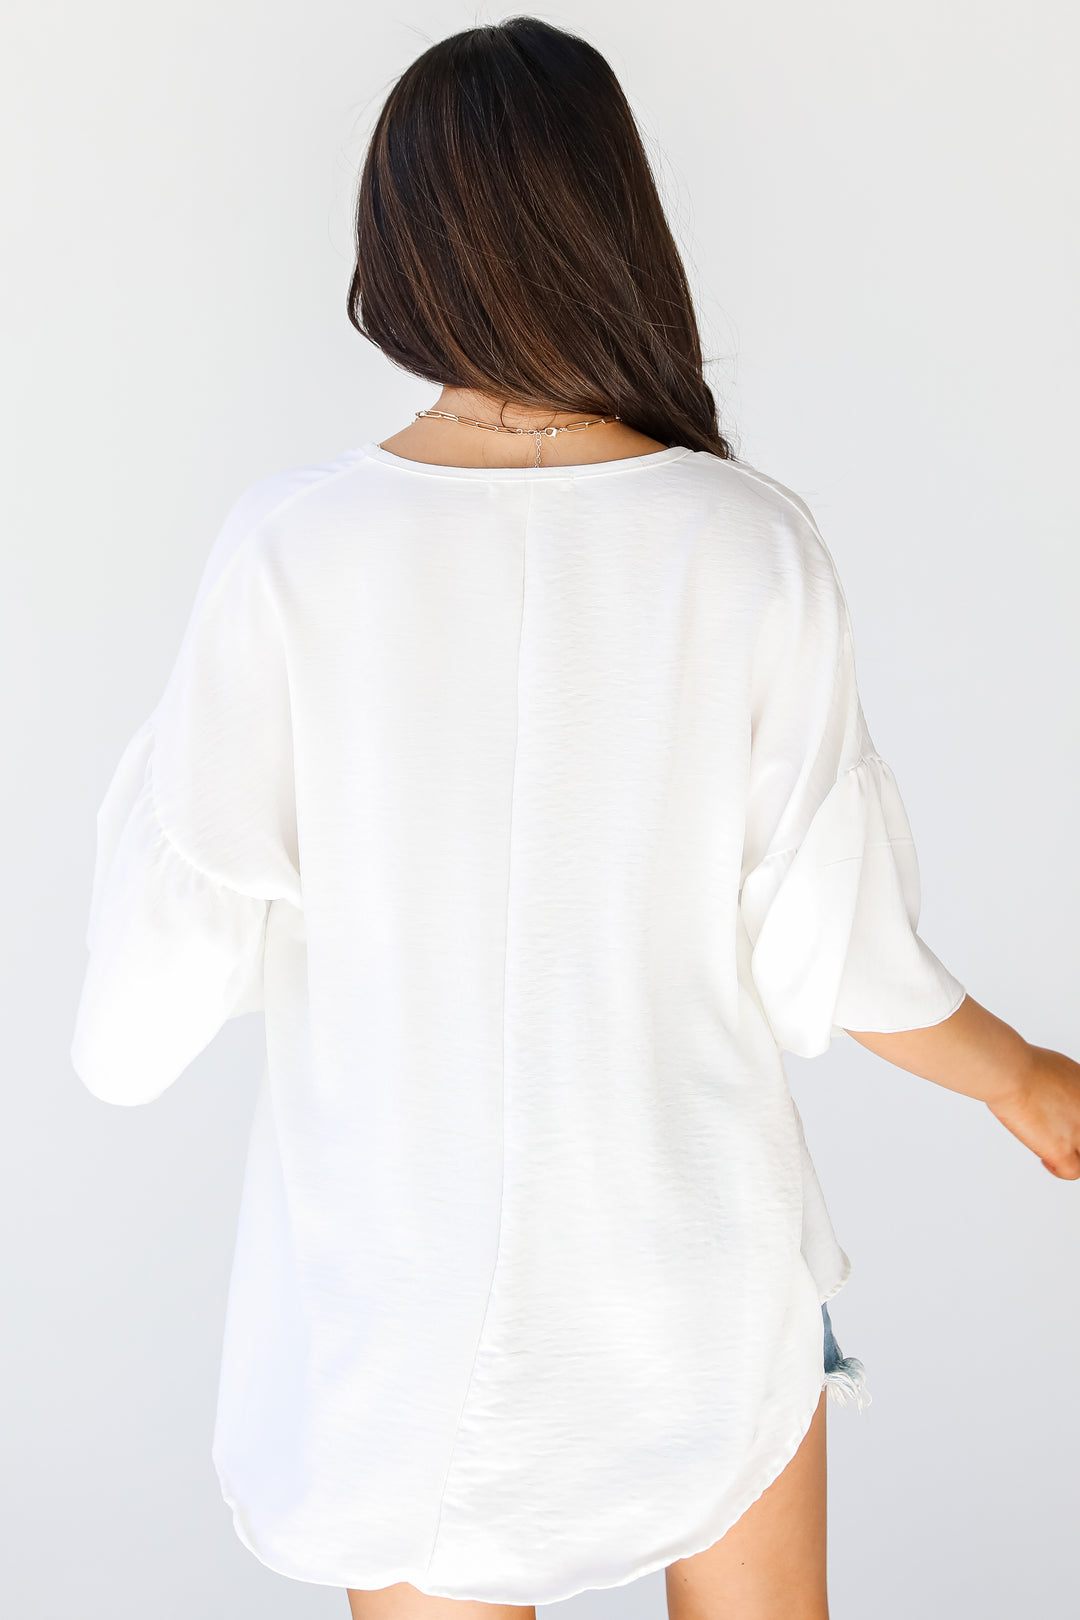 Ruffle Sleeve Blouse in ivory back view